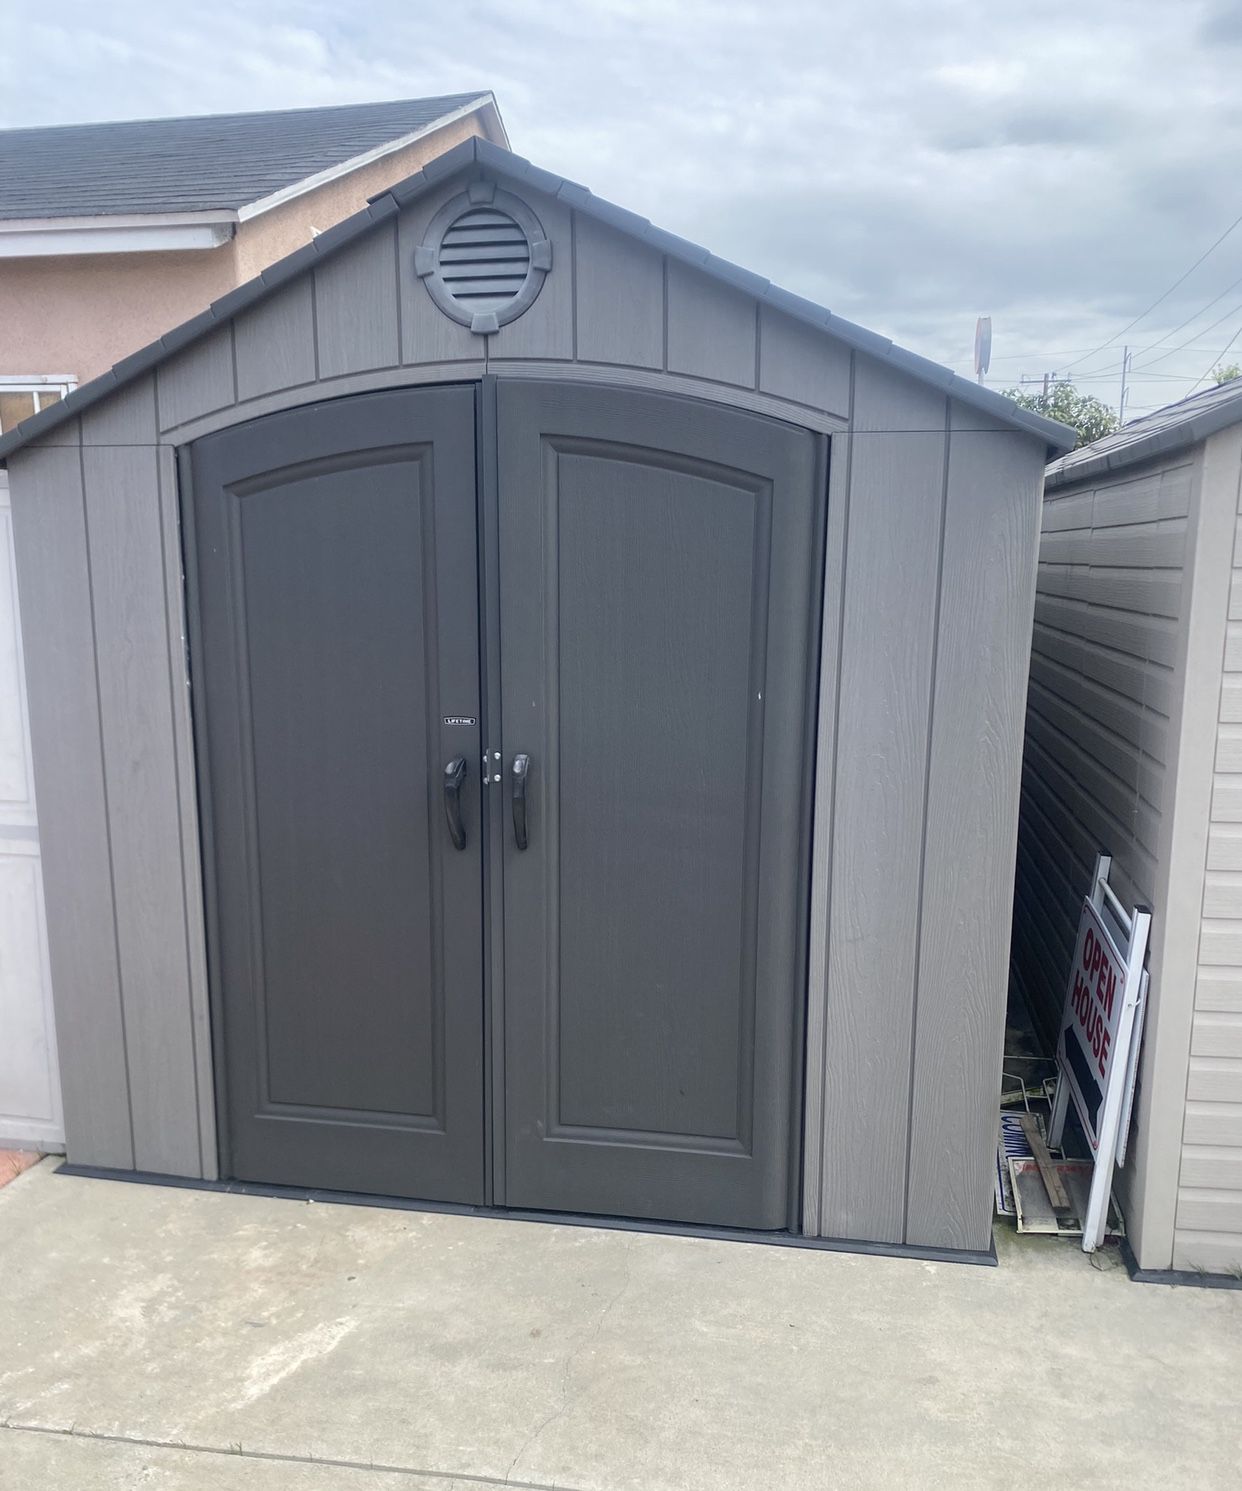  Lifetime 30 Ft. x 8 Ft. Outdoor Storage Shed - 30 x 8 Ft.